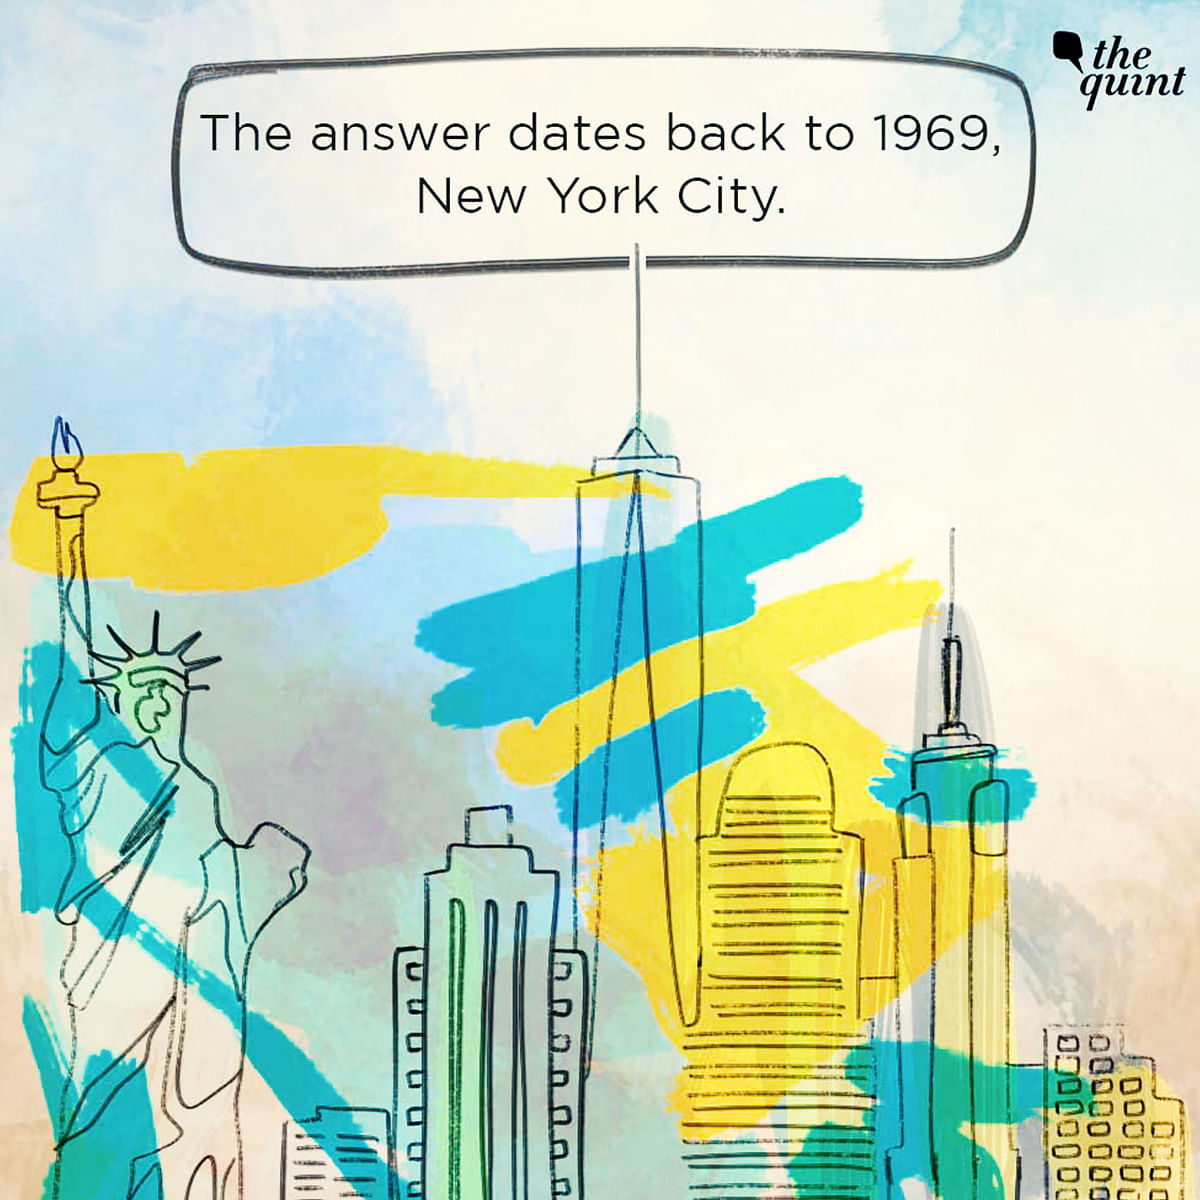 The answer dates back to 1969, New York City.